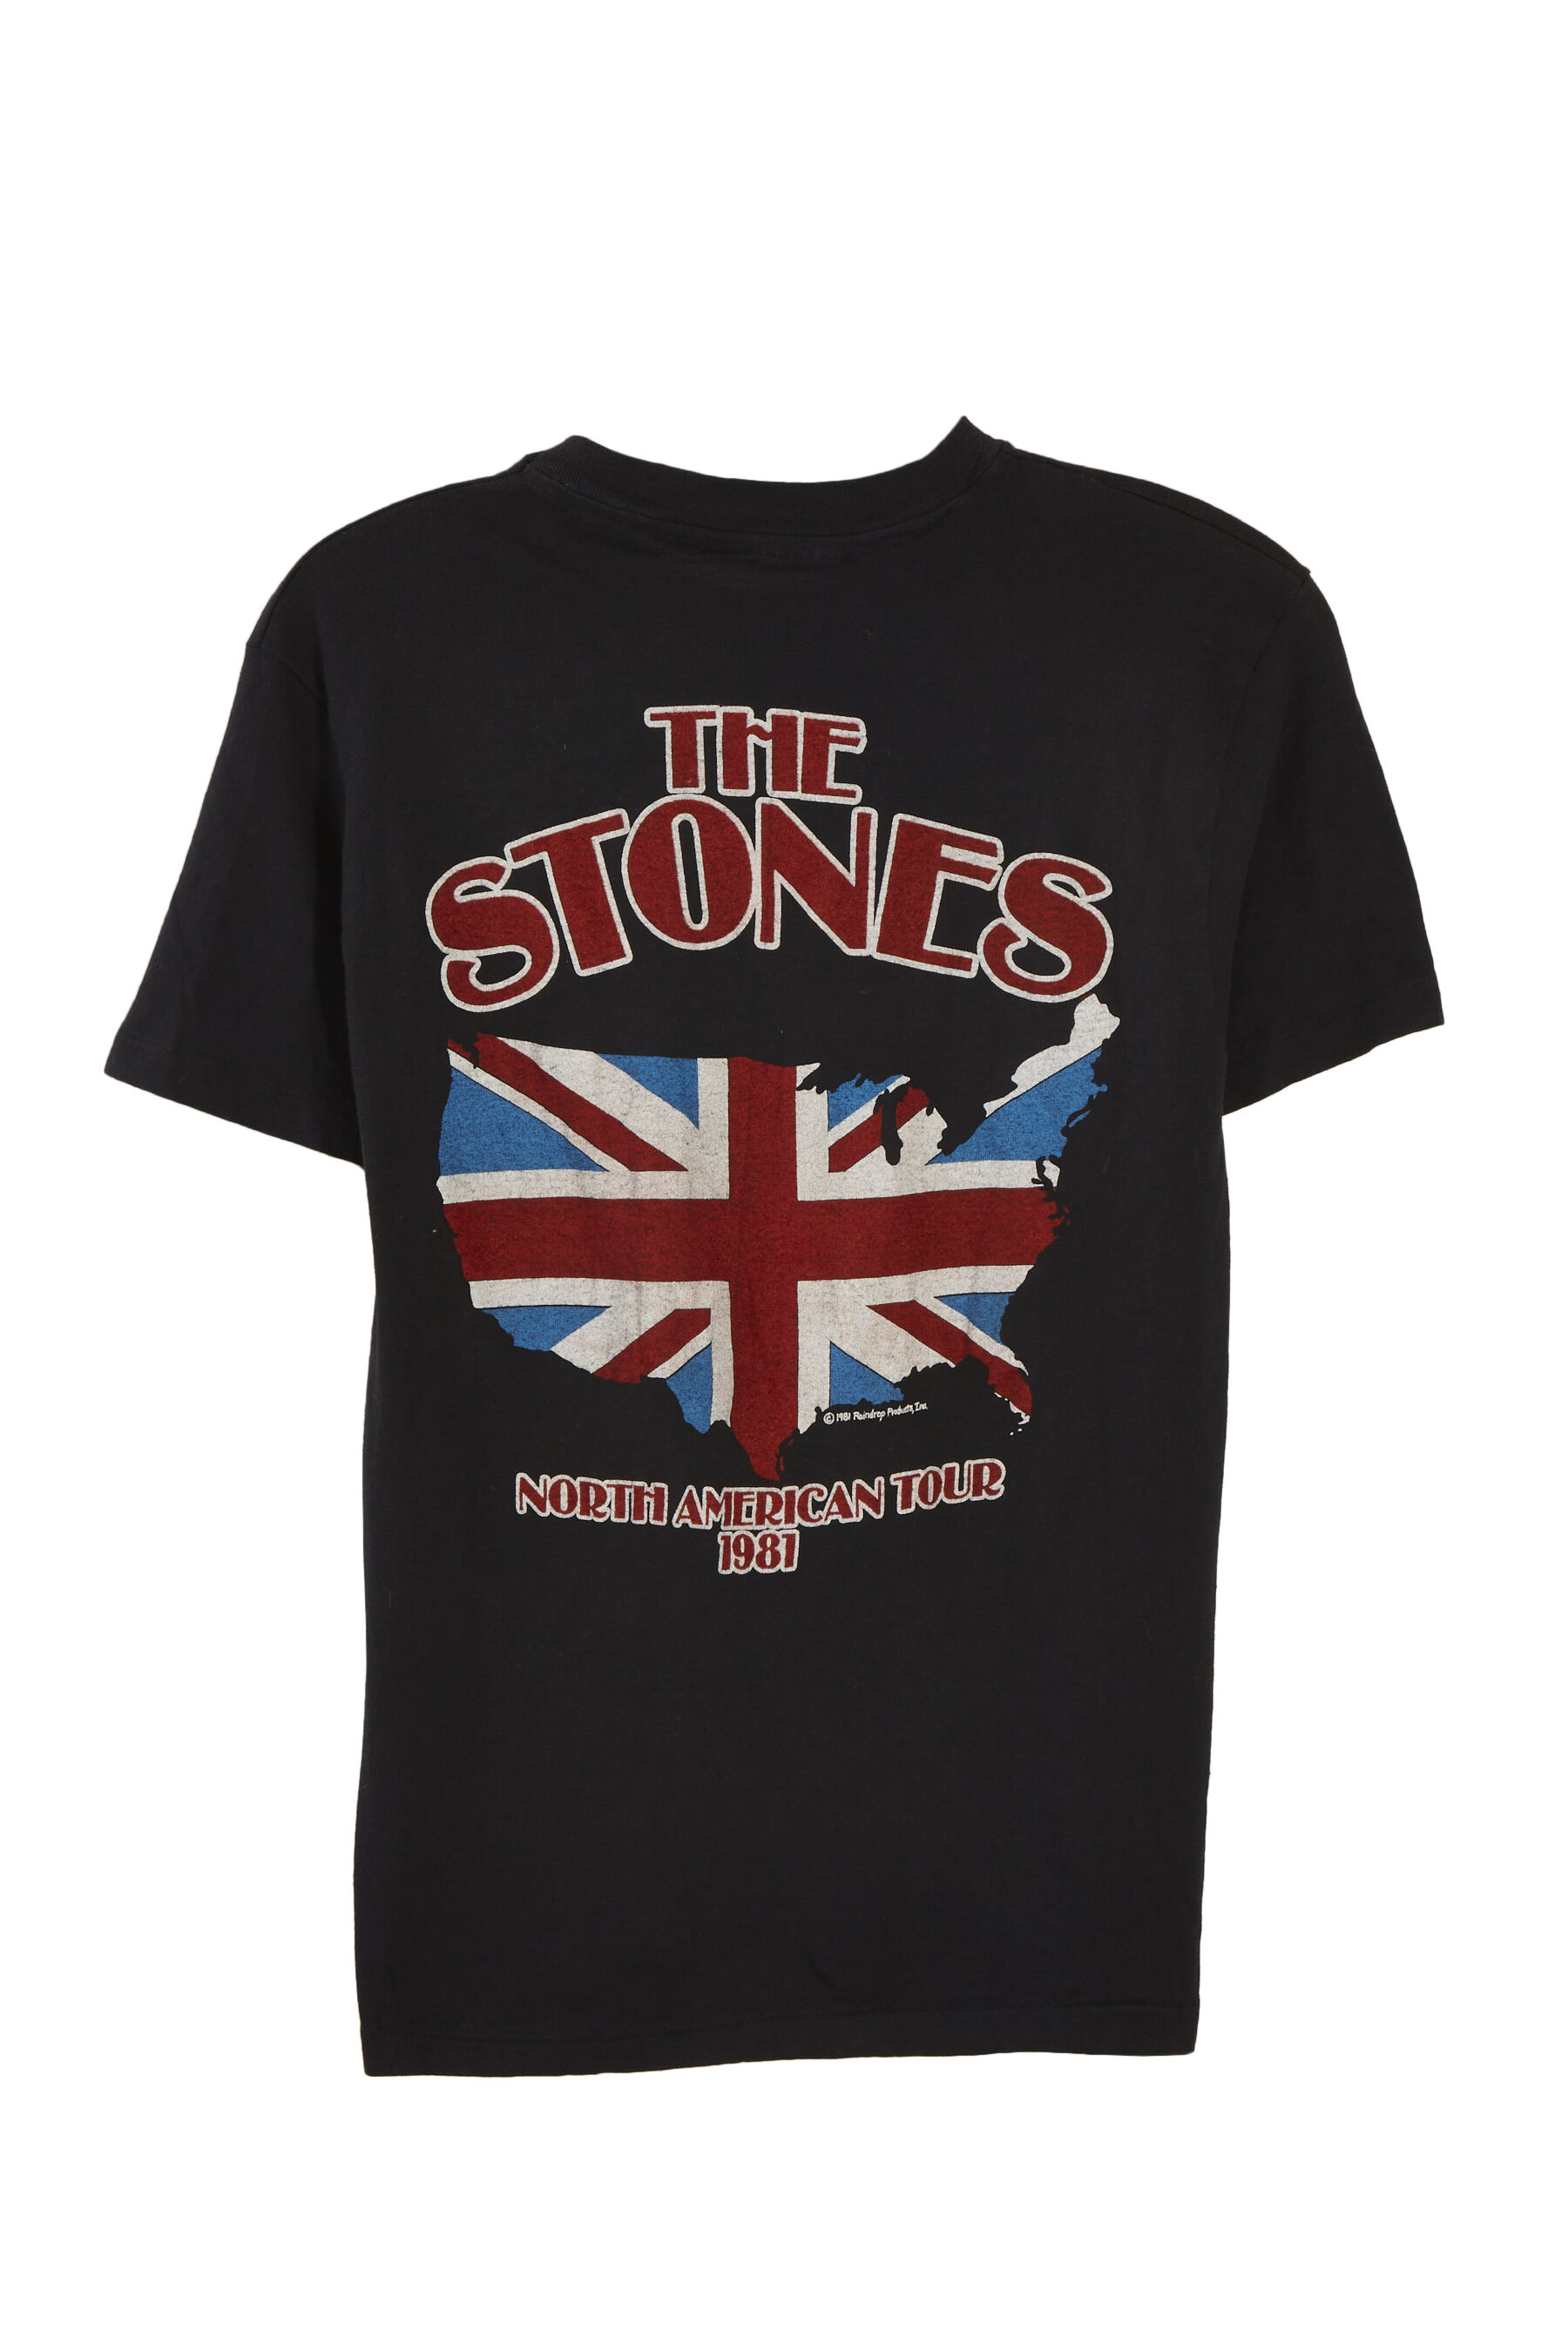 Rolling Stone 1981 The Stones North American Tour Tee